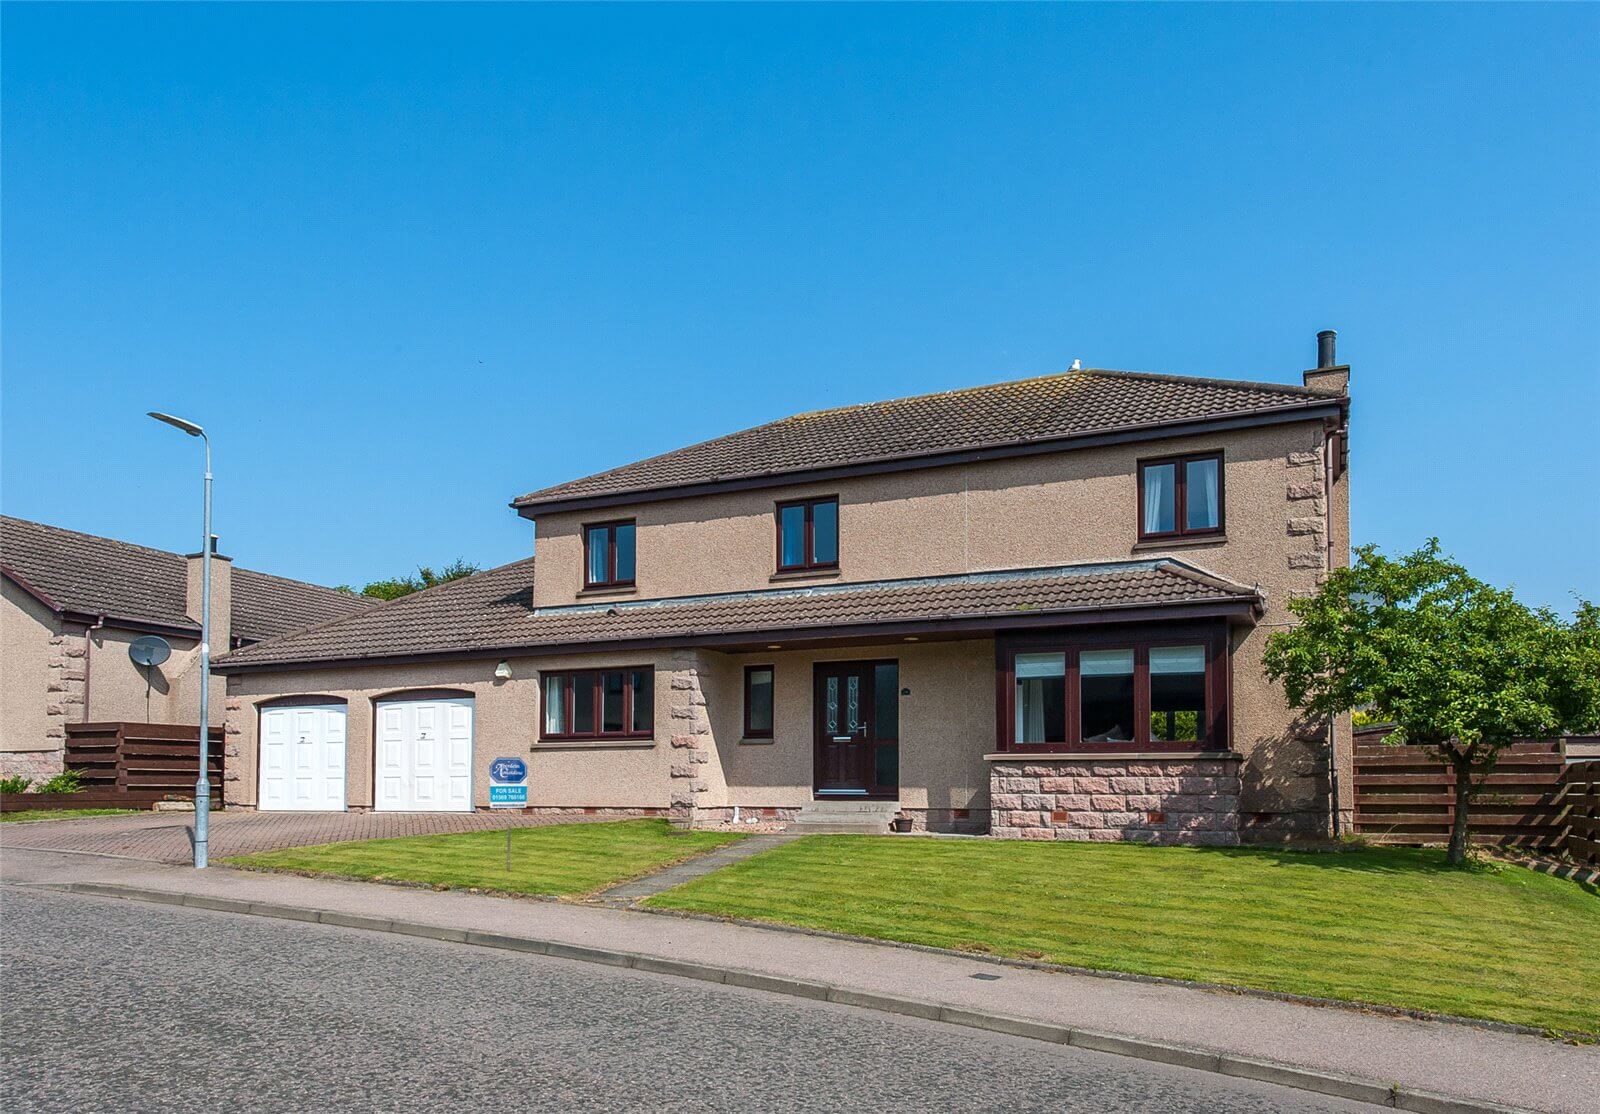 Our latest properties for sale and to let (5th August 2019)